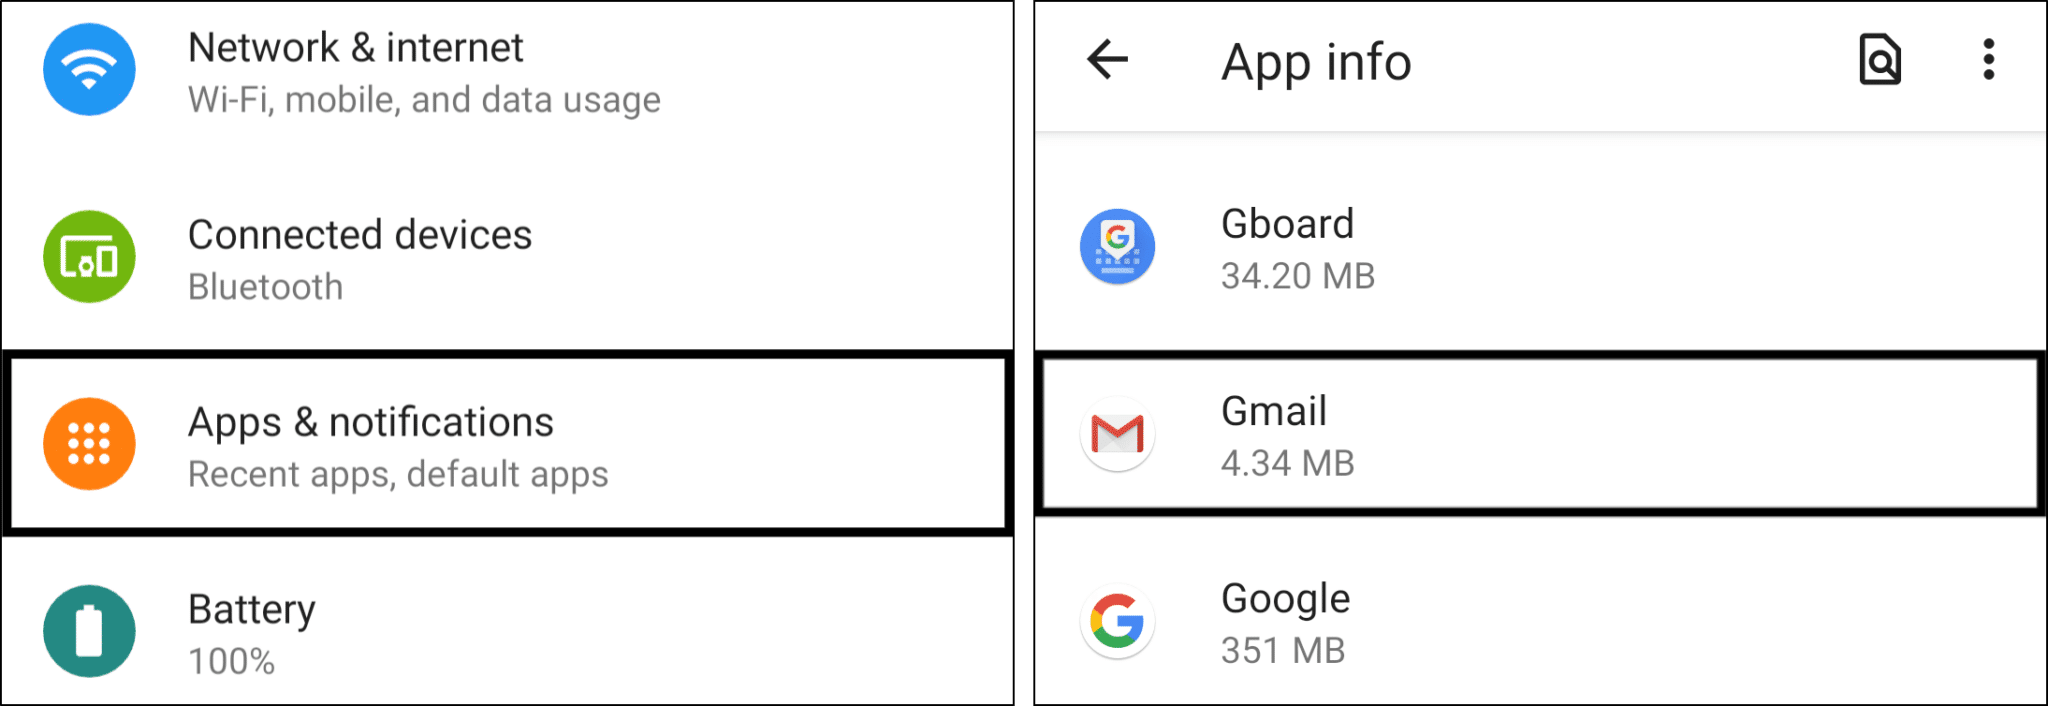 access Gmail app settings in system settings on Android to clear cache data to fix Gmail search not working, finding emails, or showing no results